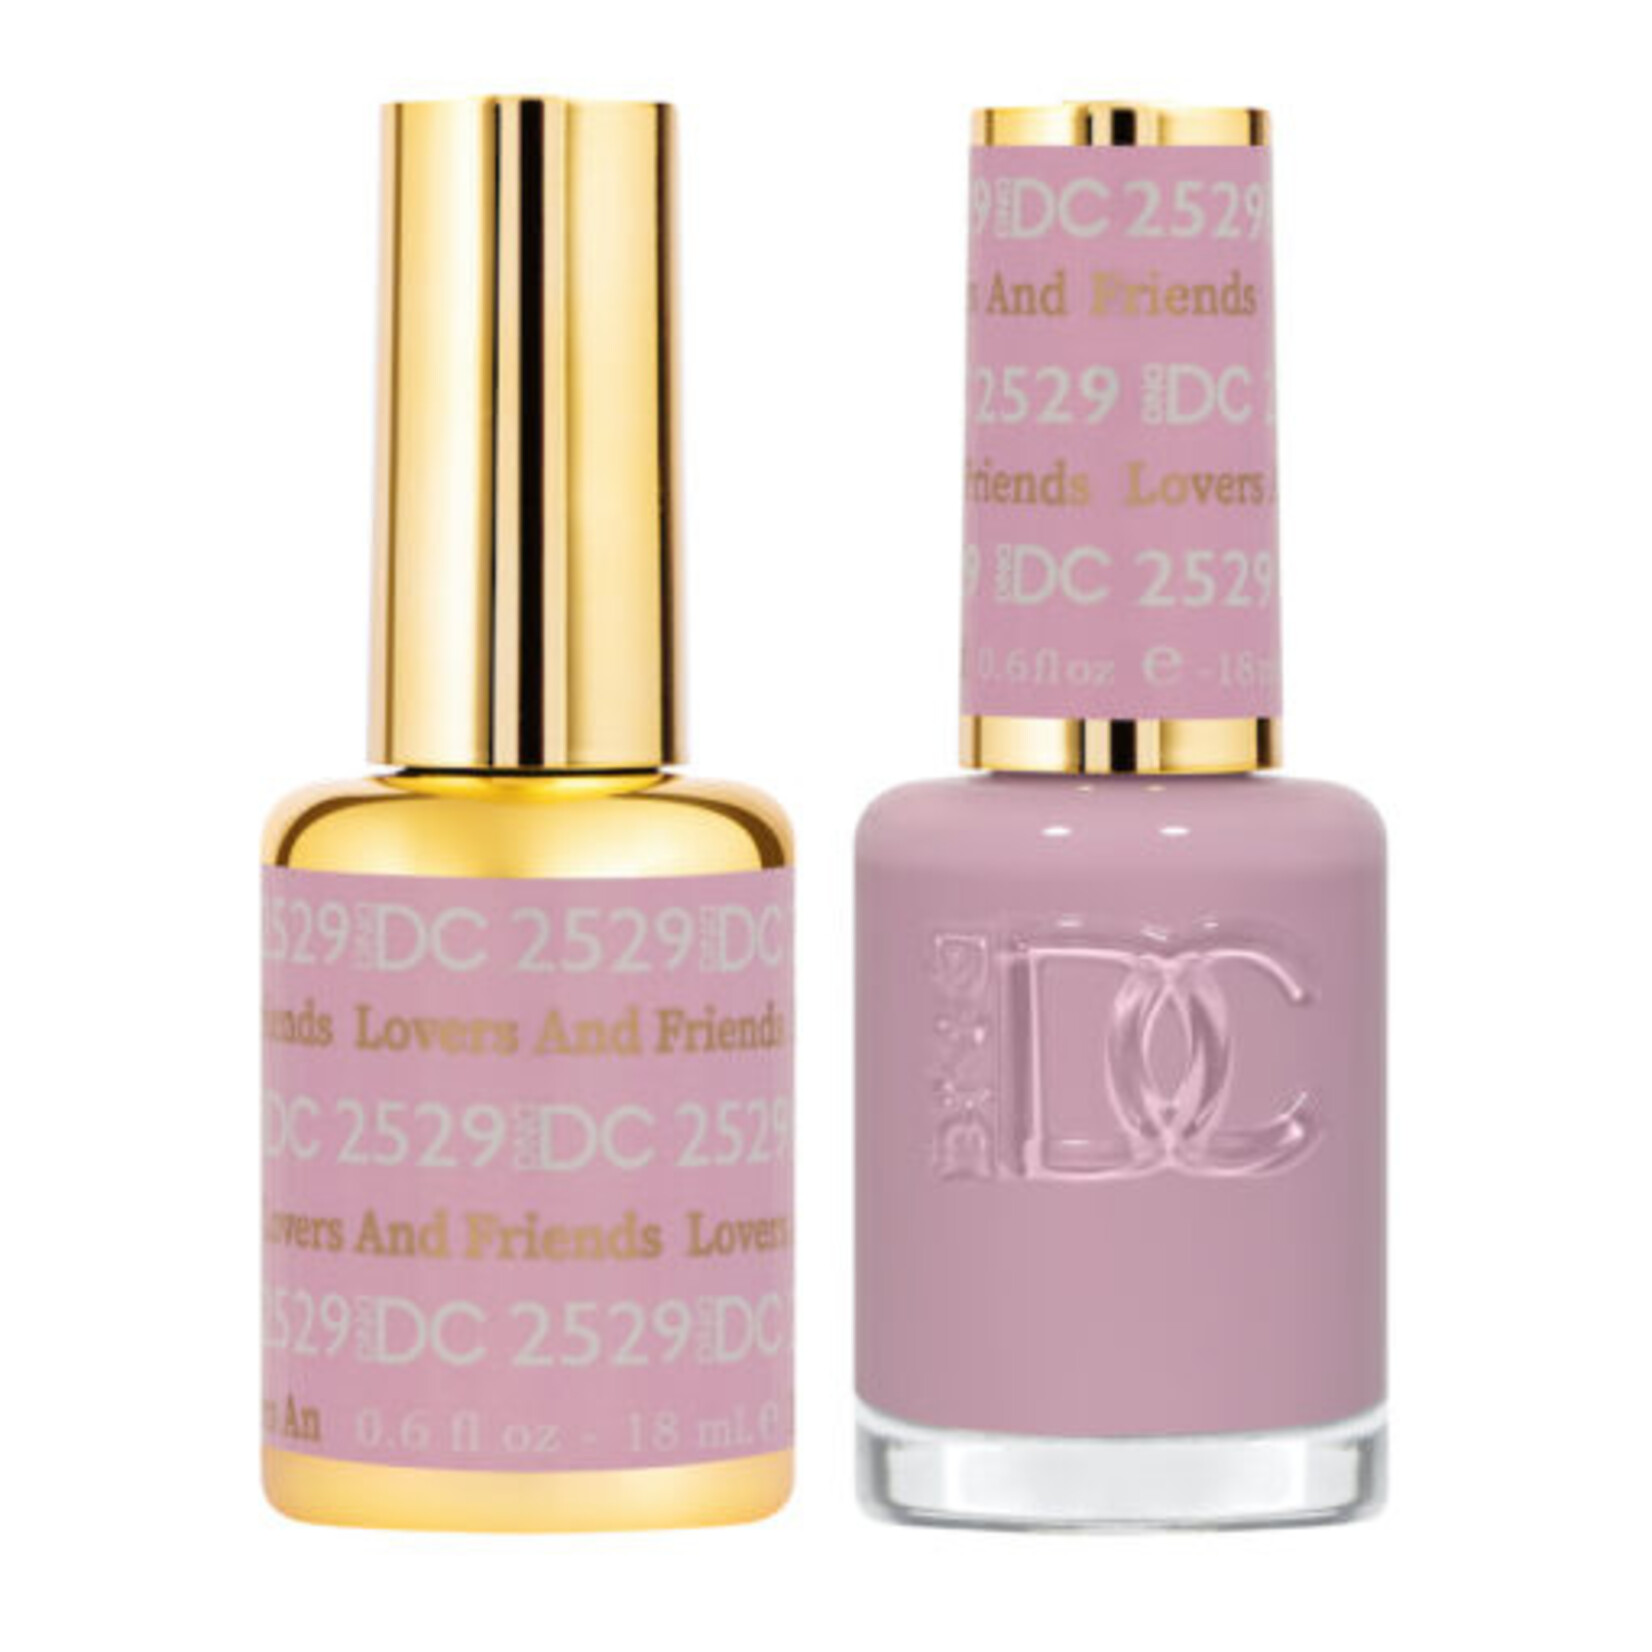 DC - 2529 - Lovers and Friends - DUO Polish